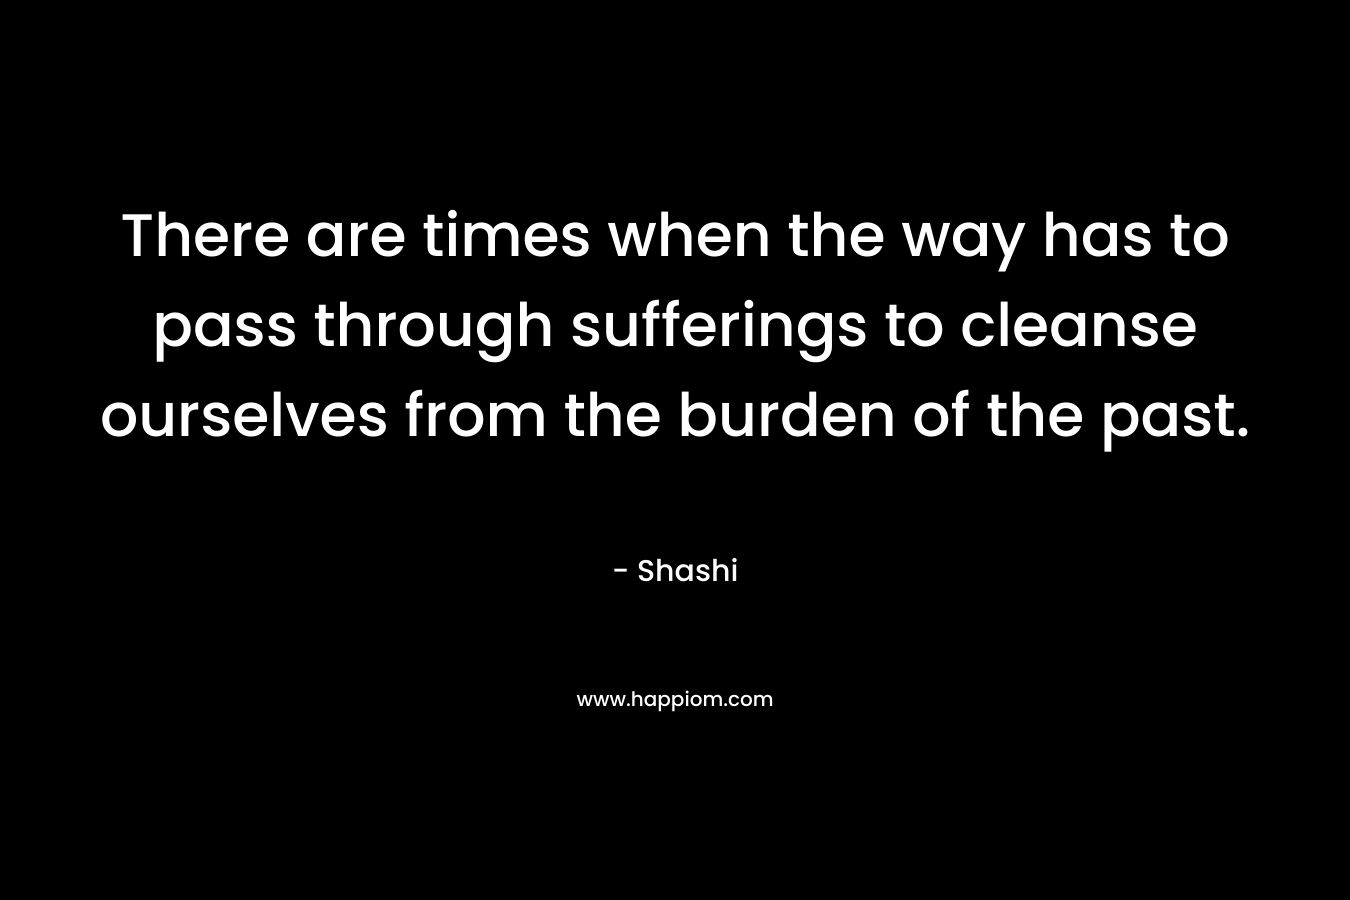 There are times when the way has to pass through sufferings to cleanse ourselves from the burden of the past.